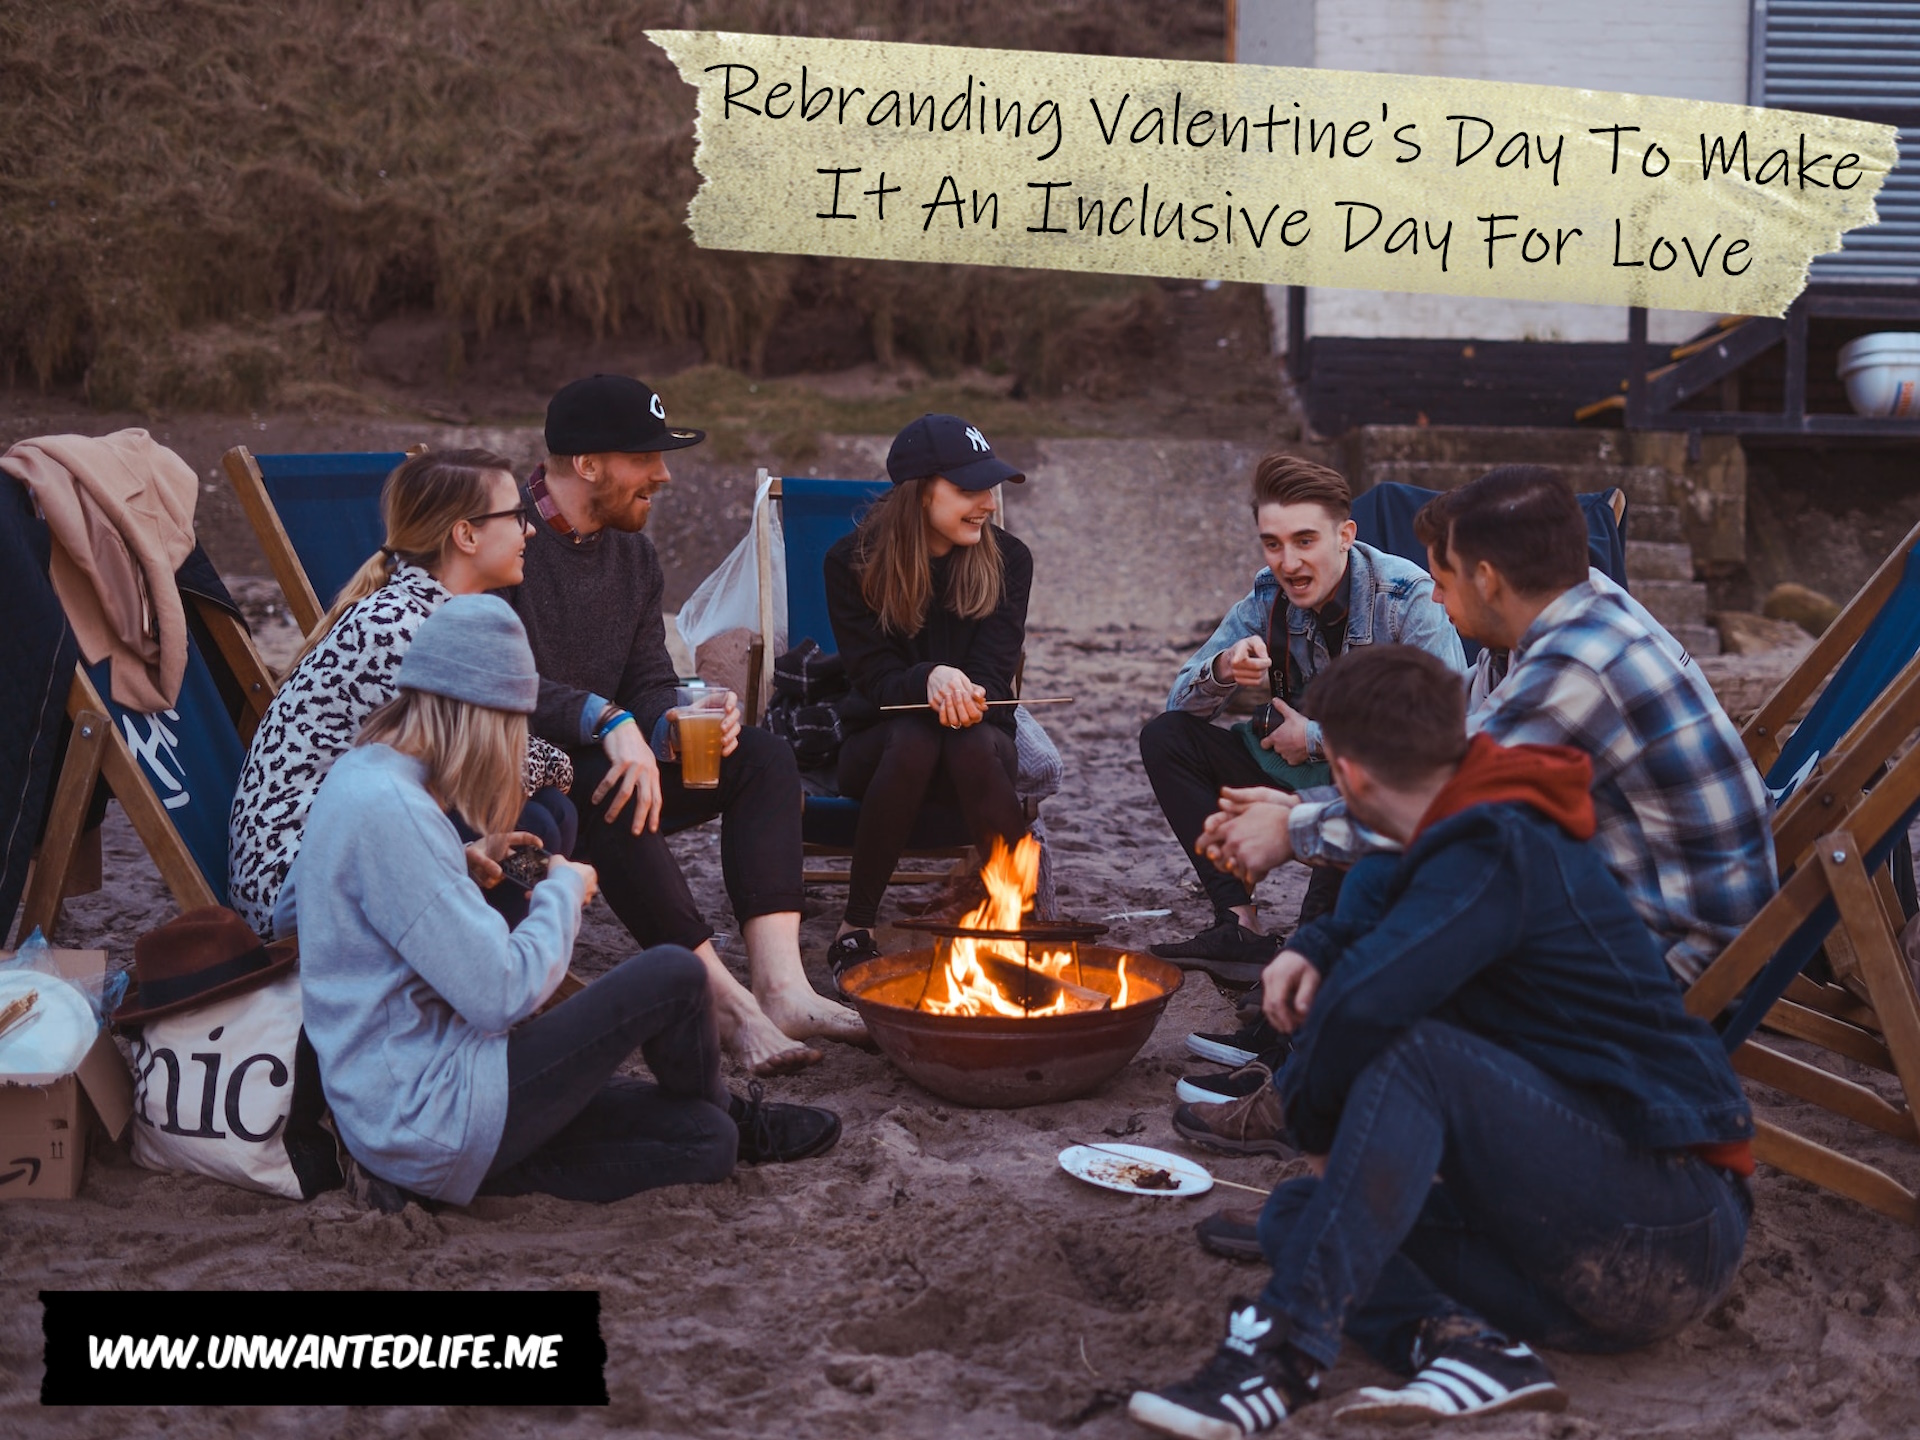 A photo of a group of friends sitting around a fire on a cold beach to represent the topic of the article - Rebranding Valentine's Day To Make It An Inclusive Day For Love